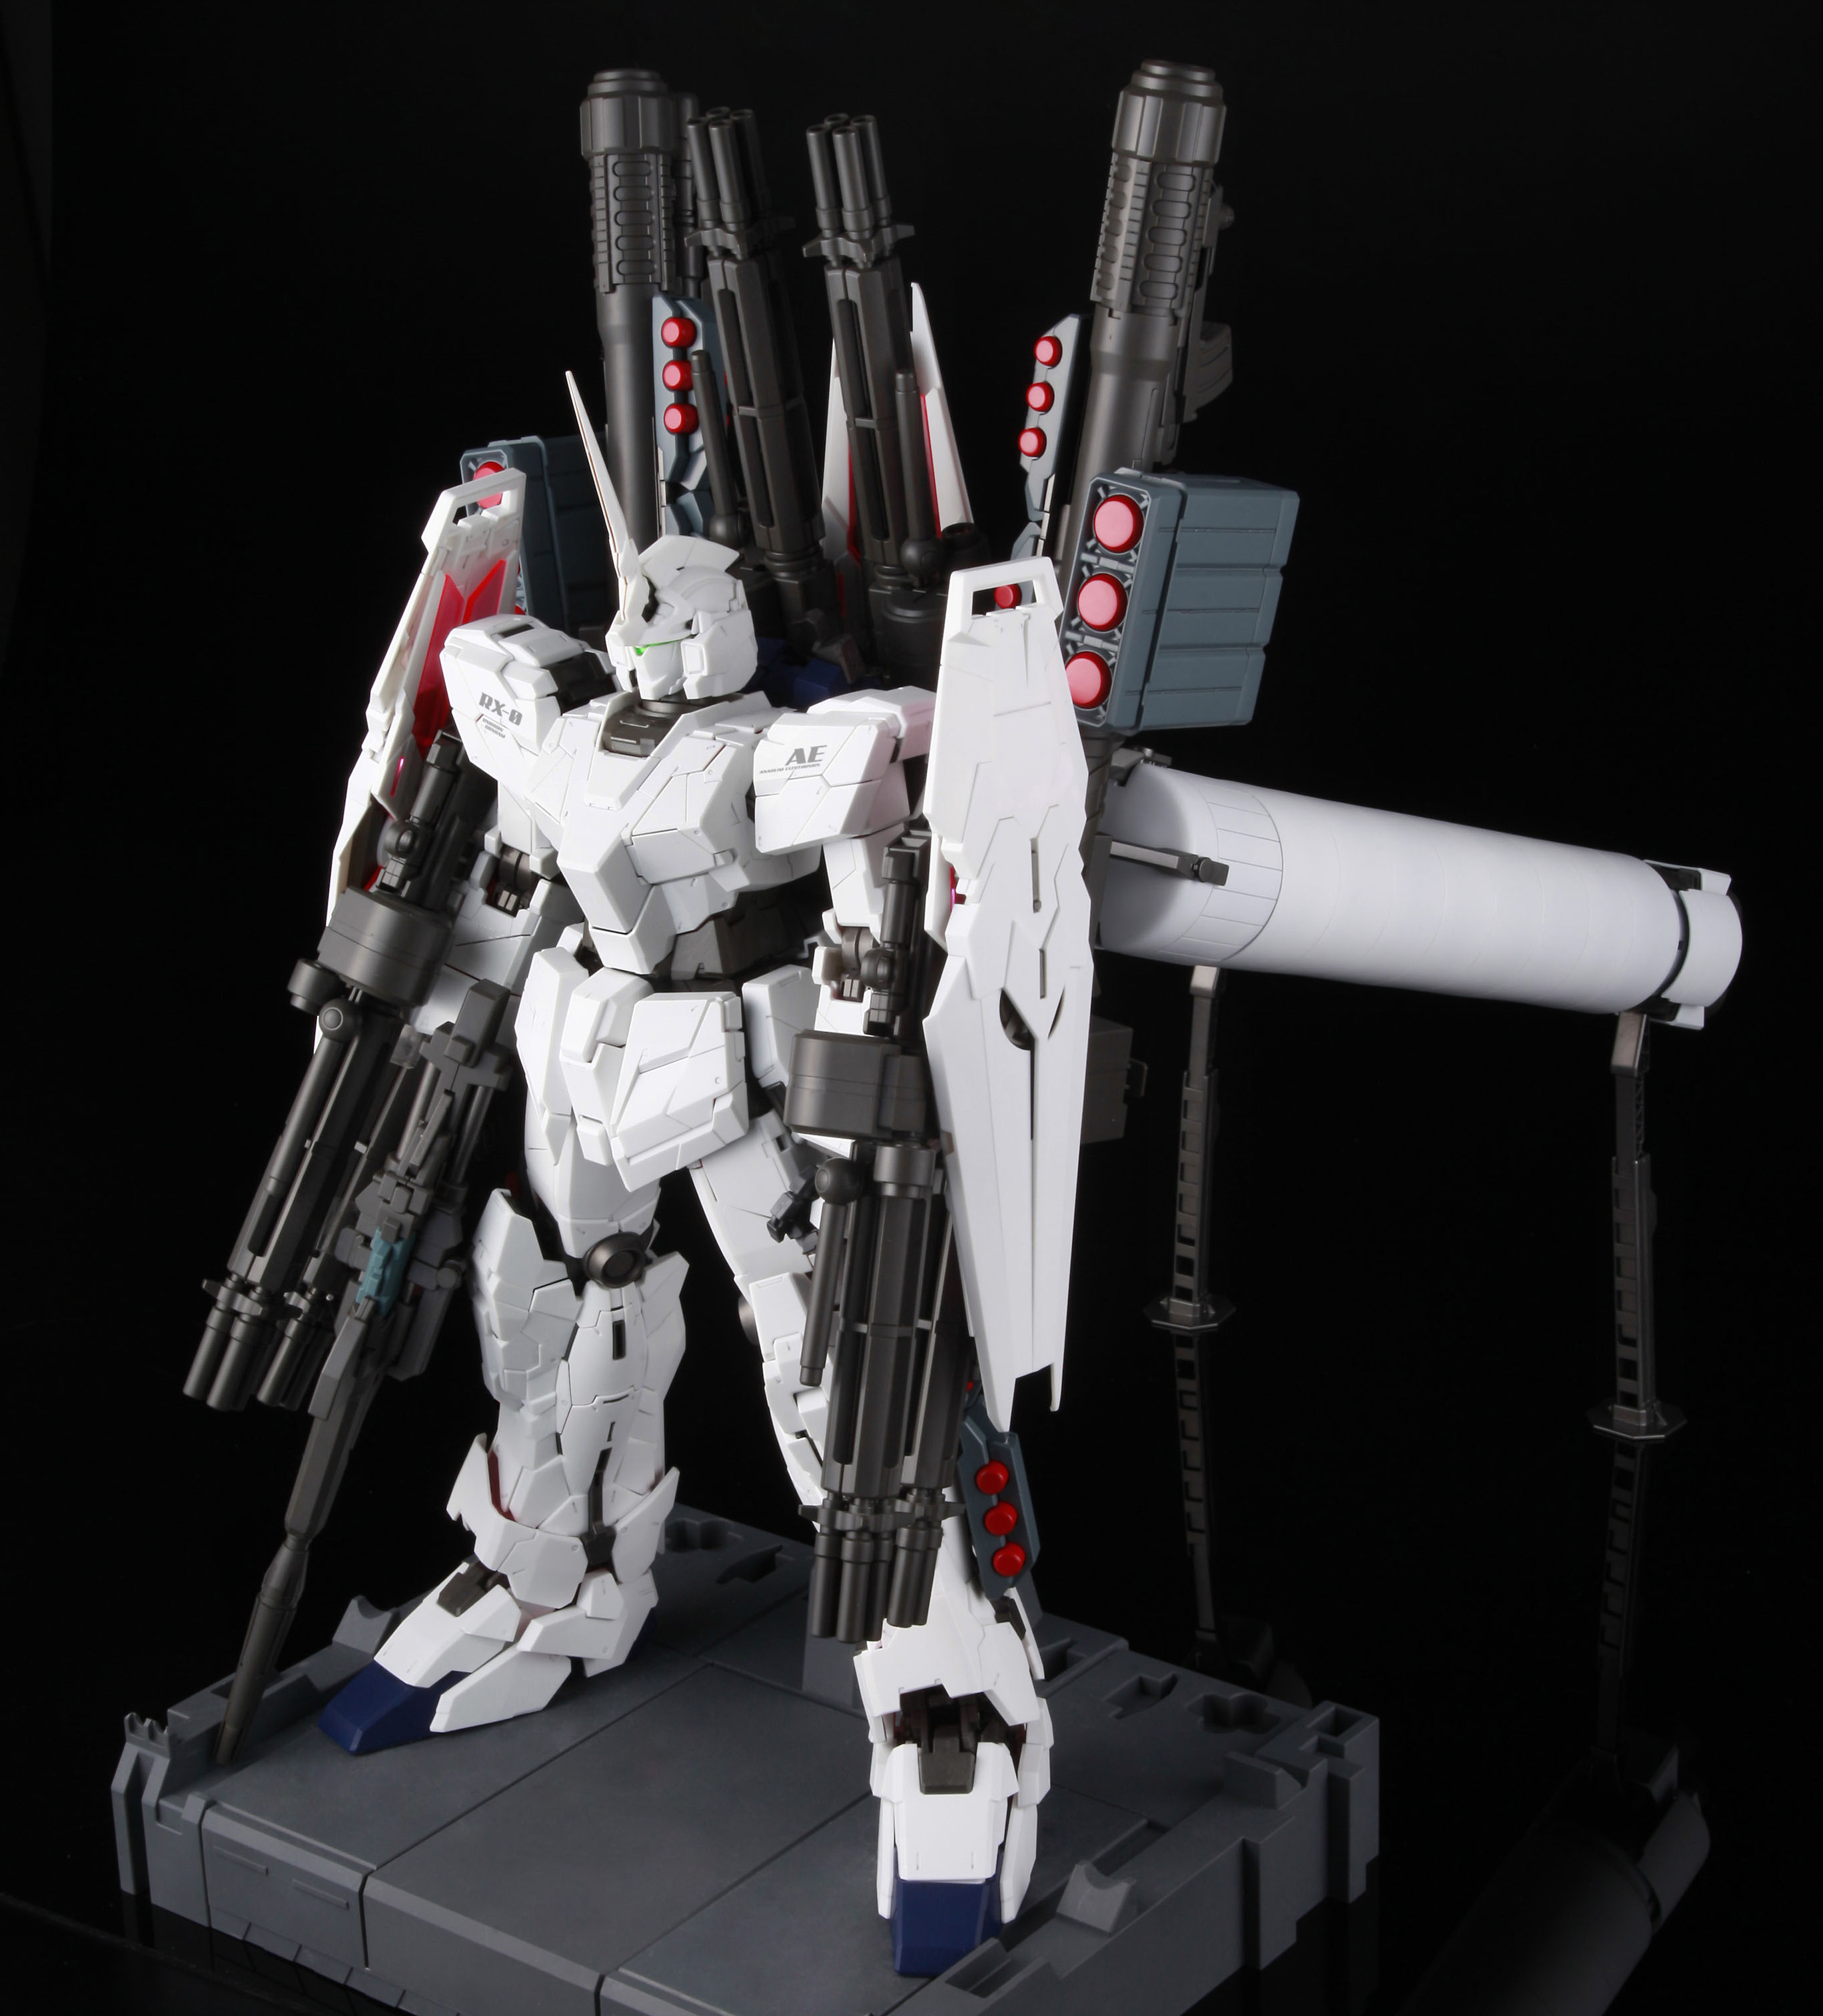 Pg 1 60 Full Armor Expansion Unit For Unicorn Gundam Sep Delivery Gundam Premium Bandai Usa Online Store For Action Figures Model Kits Toys And More